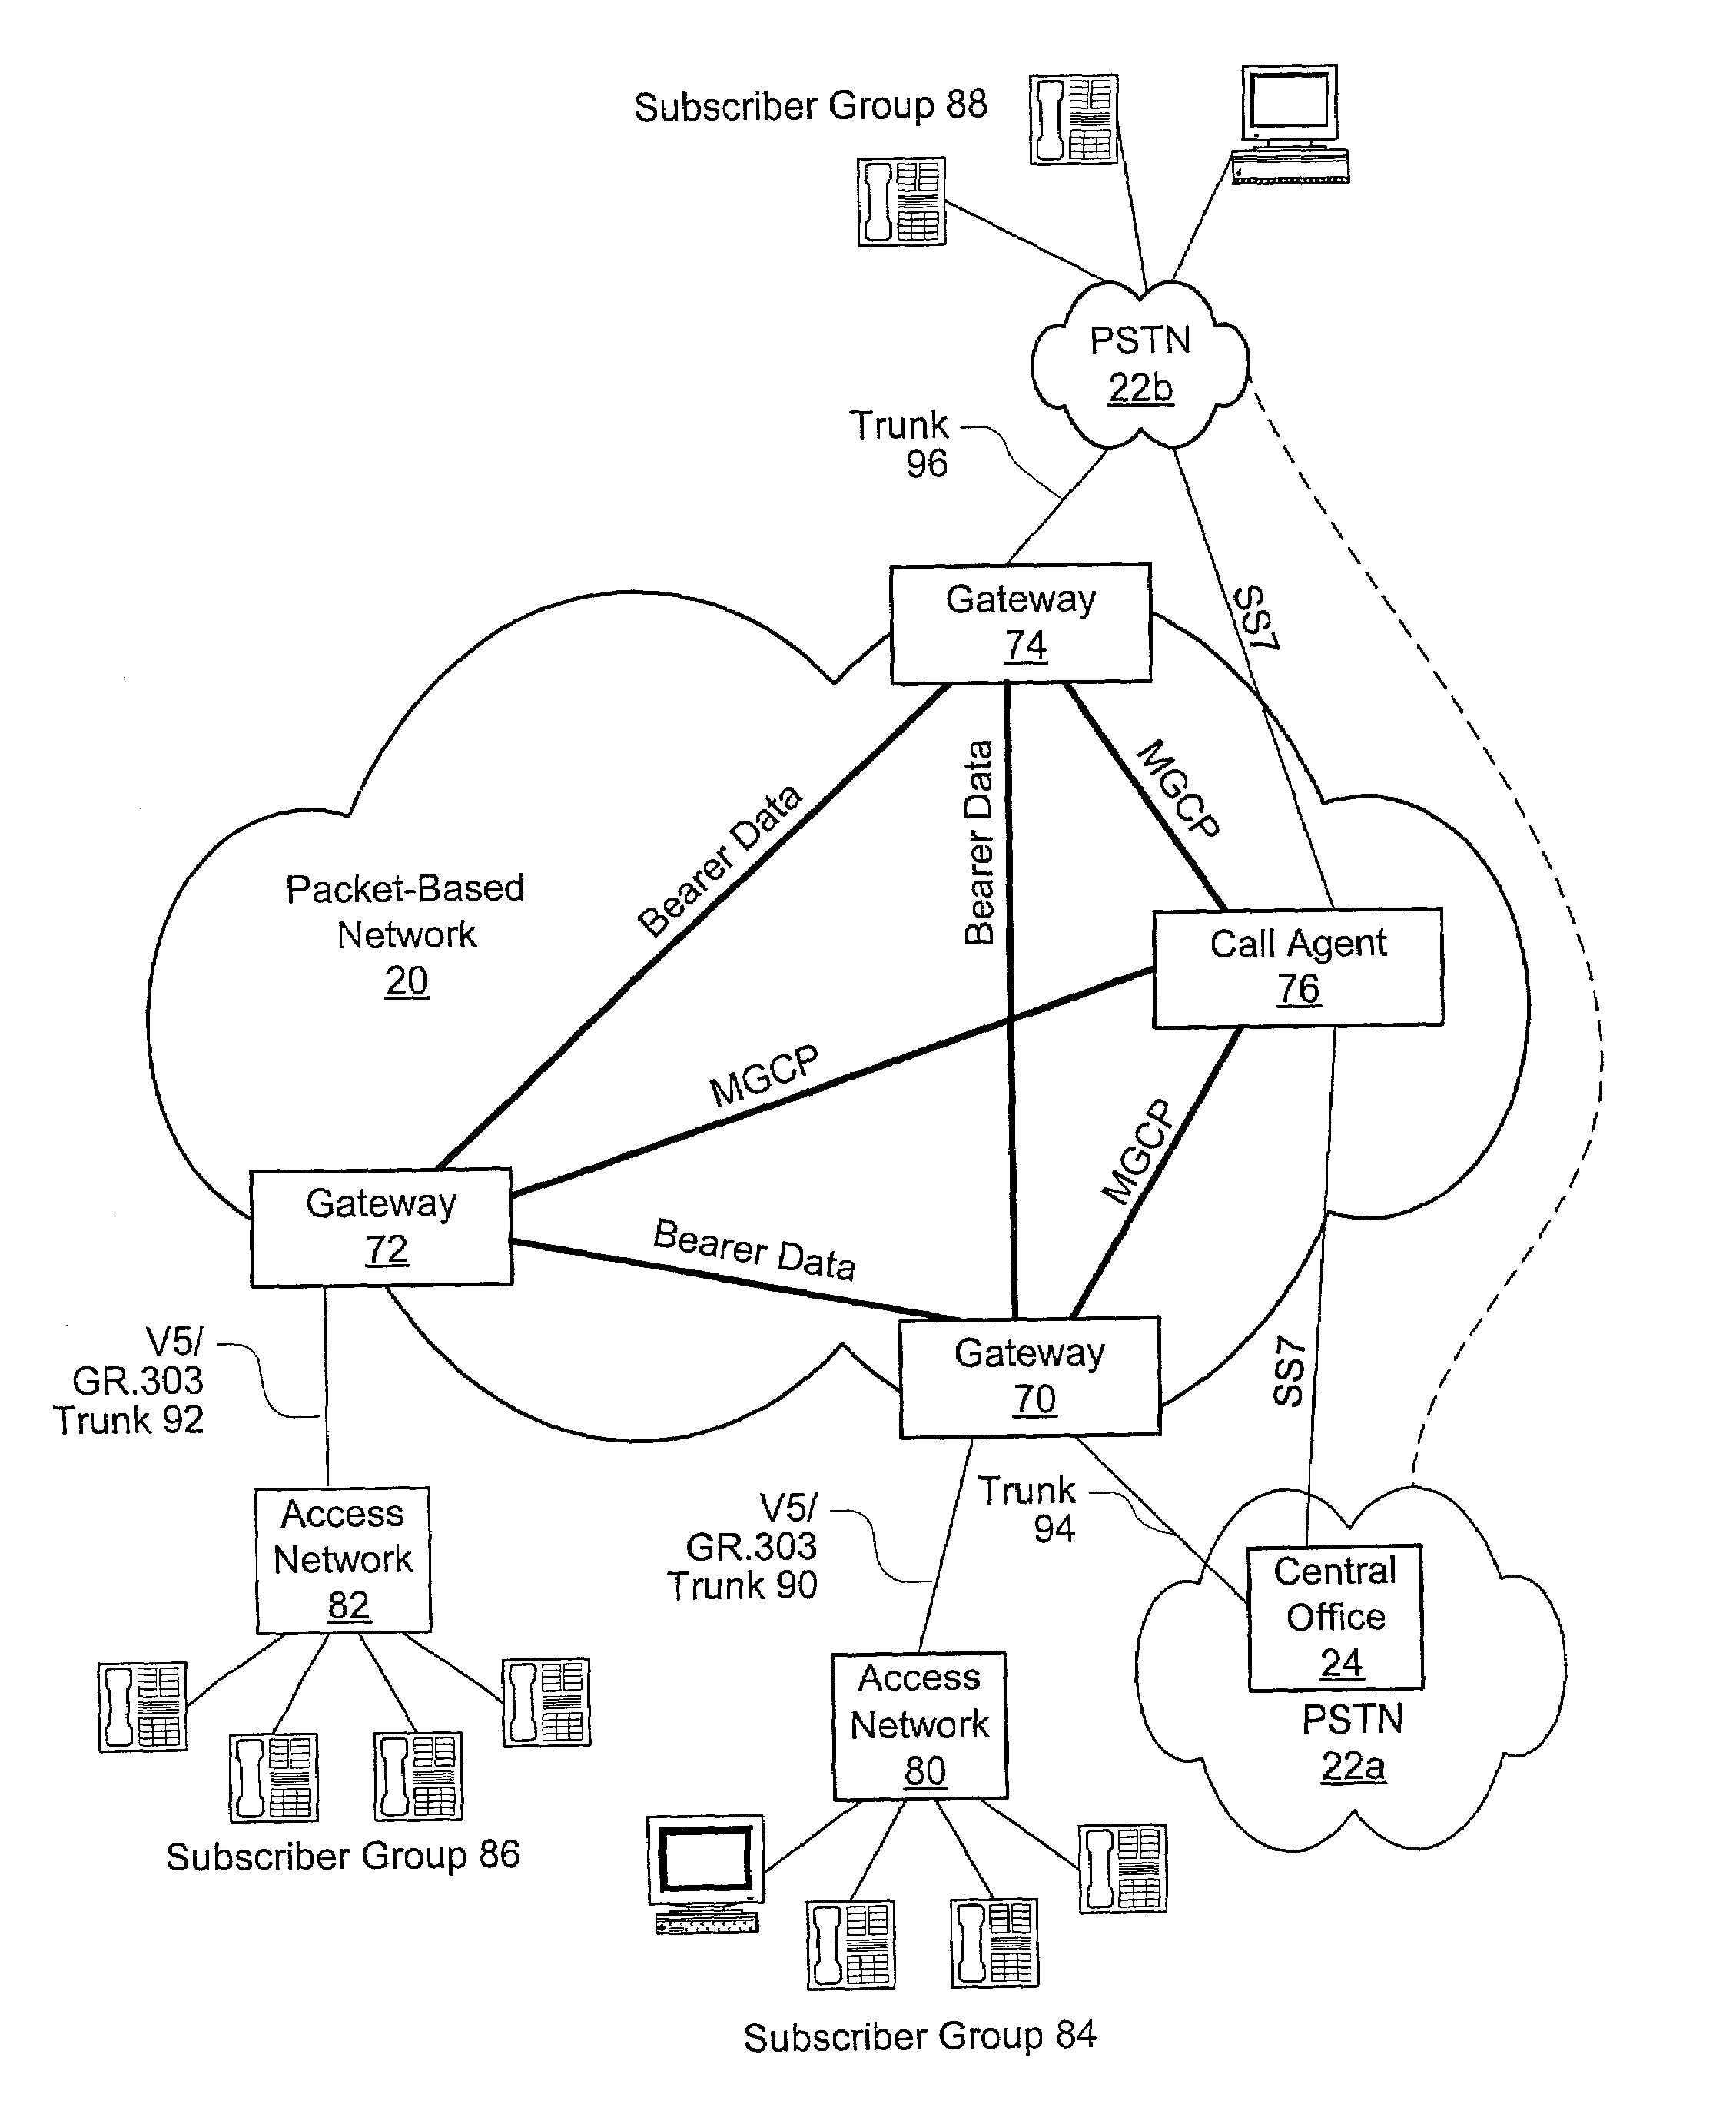 VoIP over access network